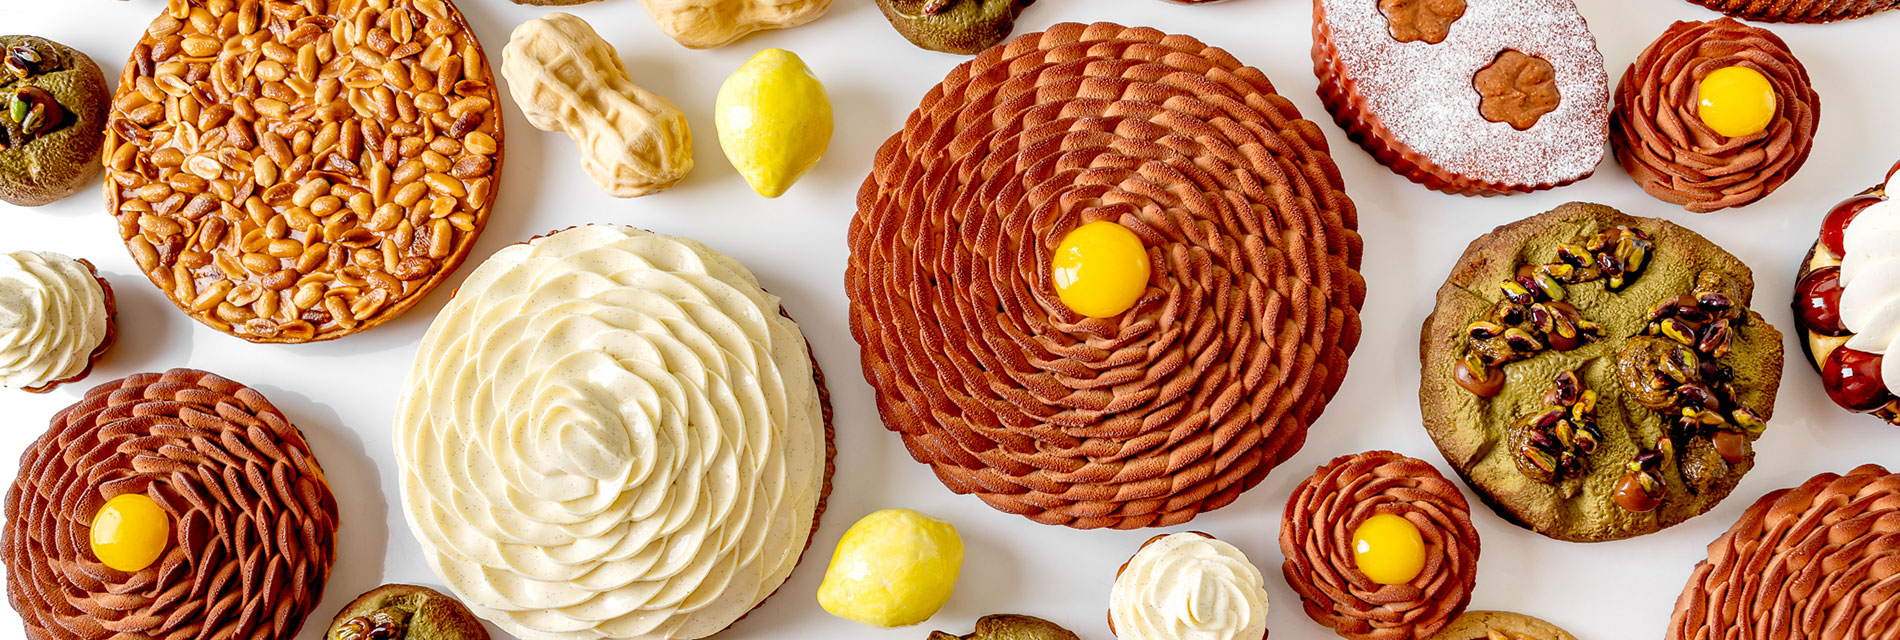 The Autumn winter collection of Cedric Grolet pastries feature intricate chocolate, pistachio, peanut and lemon delights